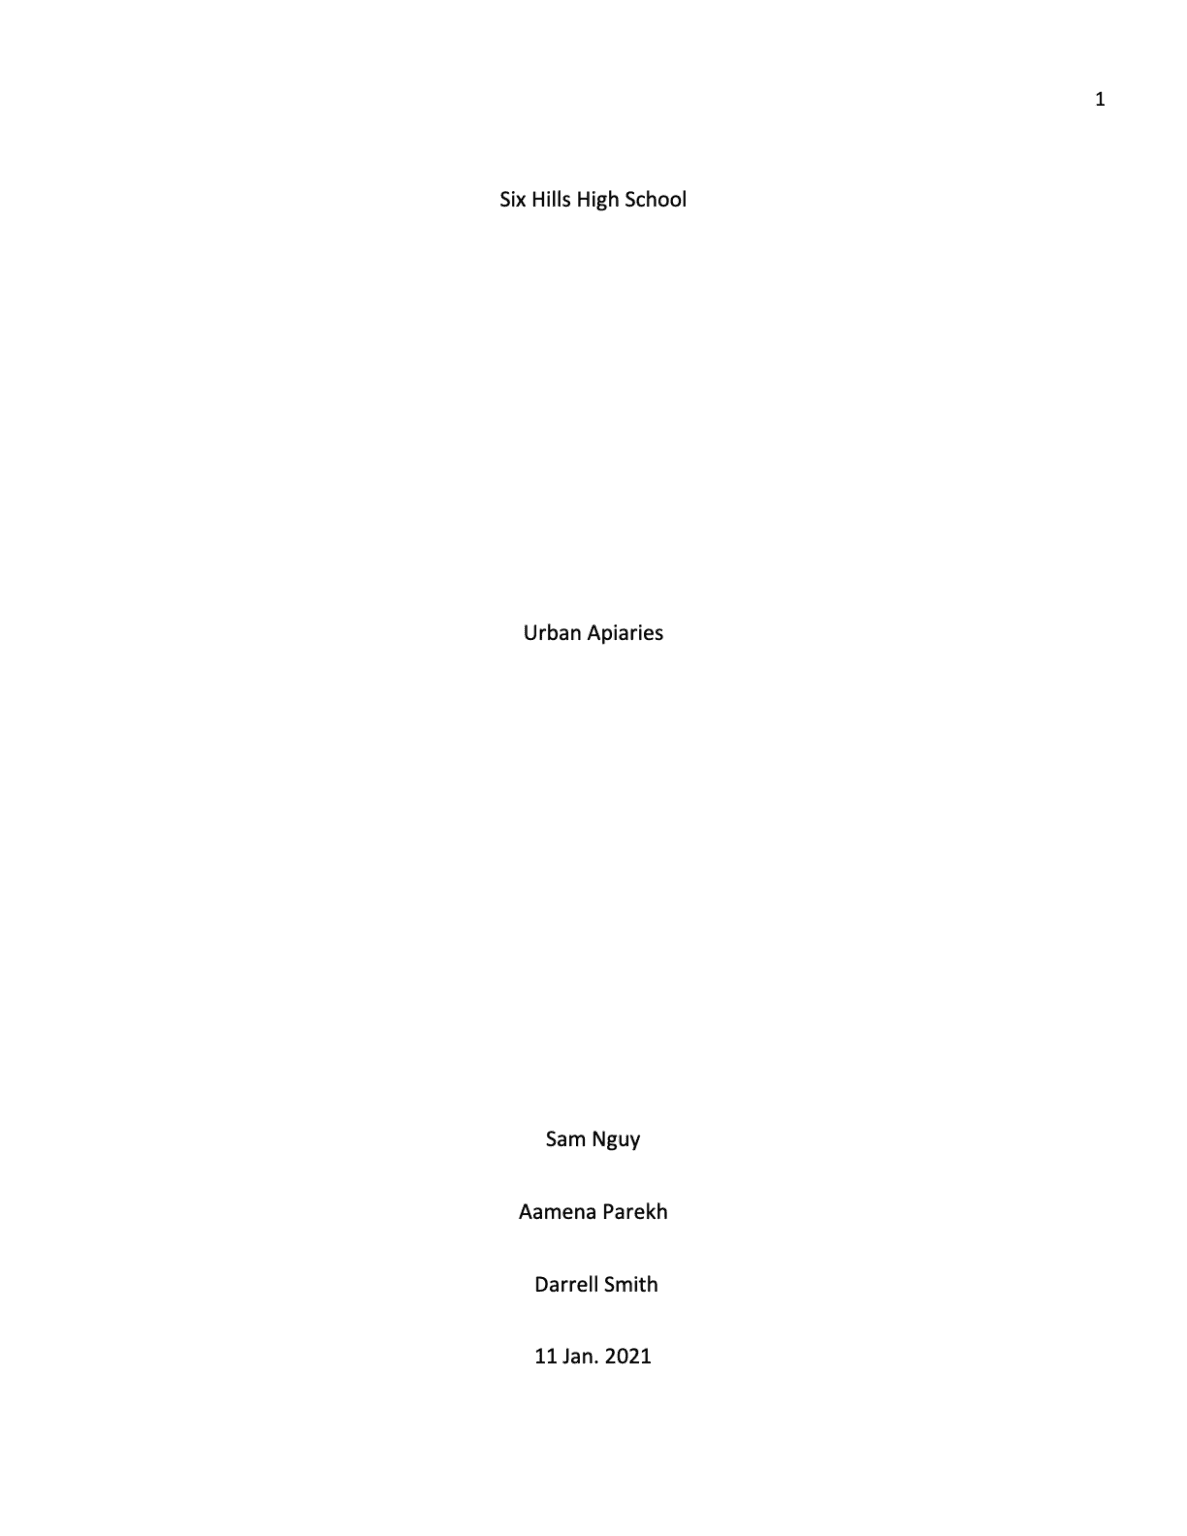 title page of an essay